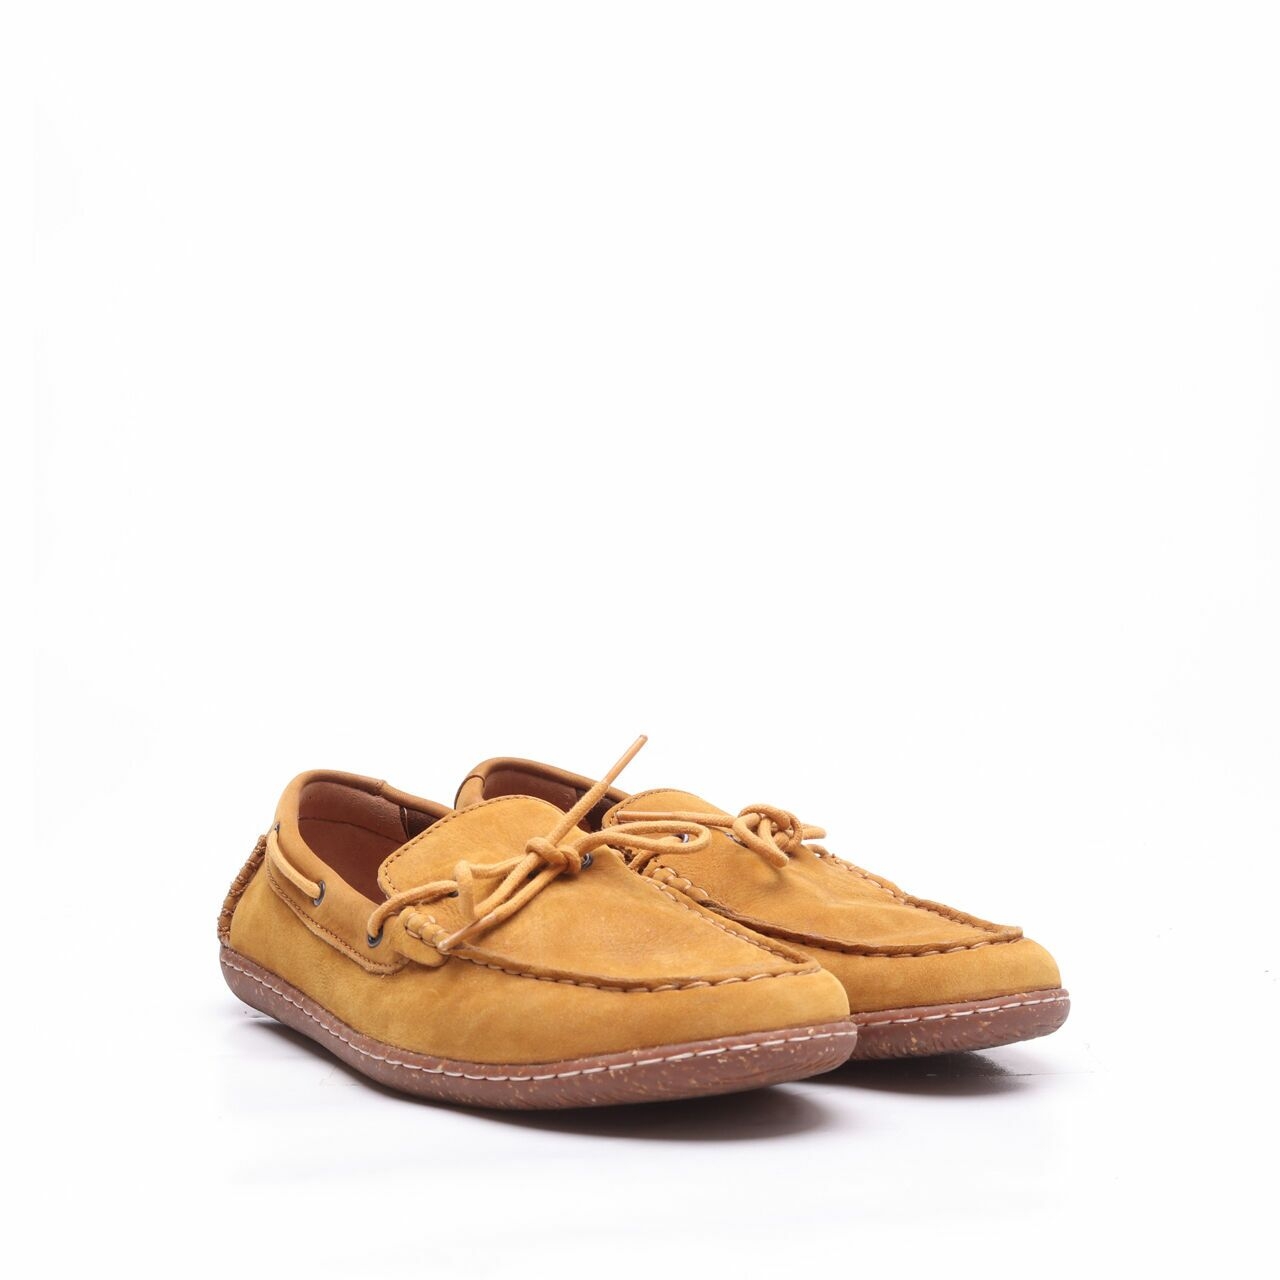 Clarks Mustard Loafers